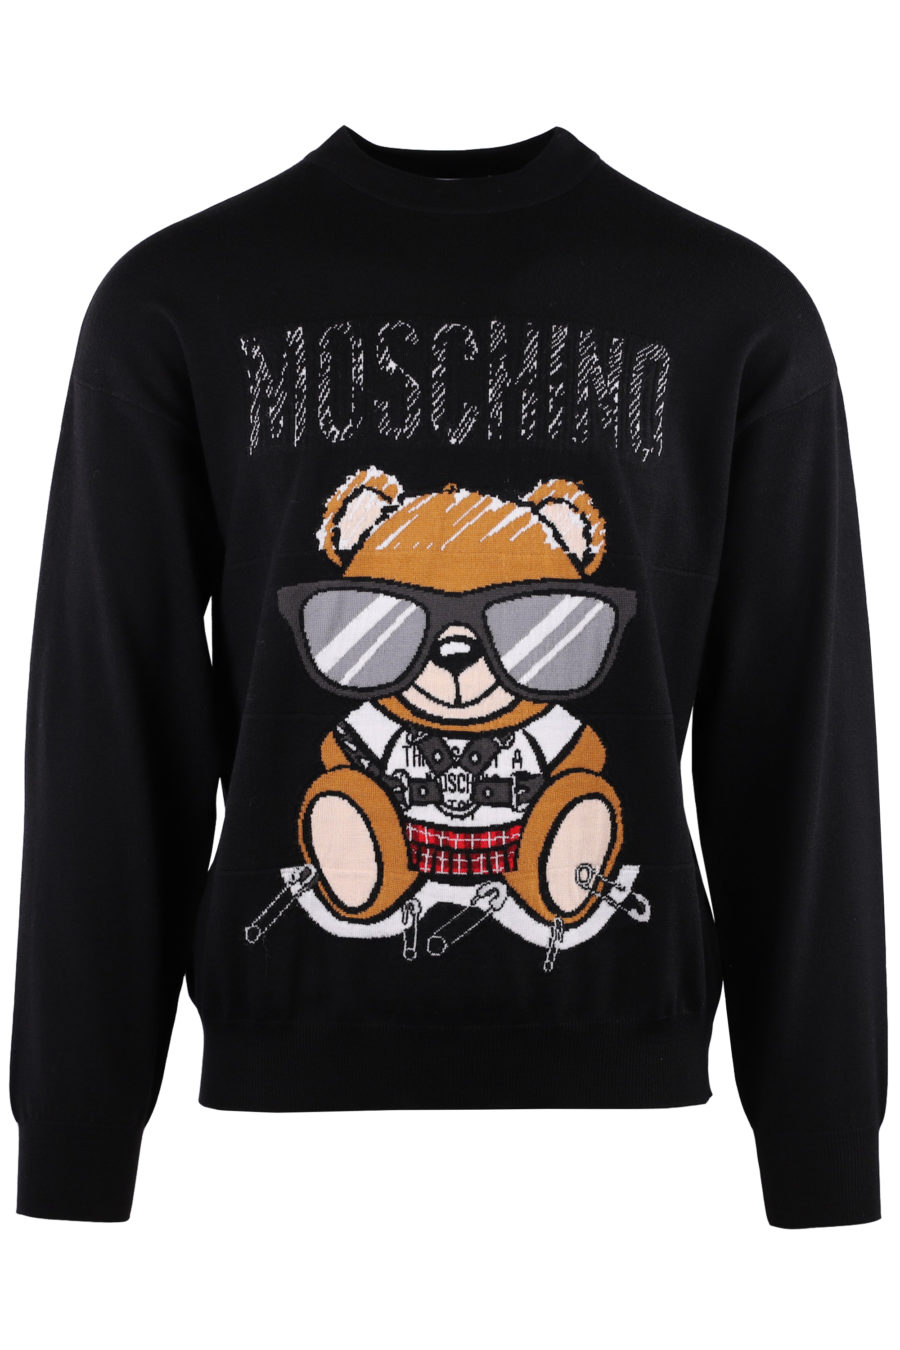 Black jumper with teddy logo with glasses - 358212d309316ea355d19ab7c743f587c3a31621